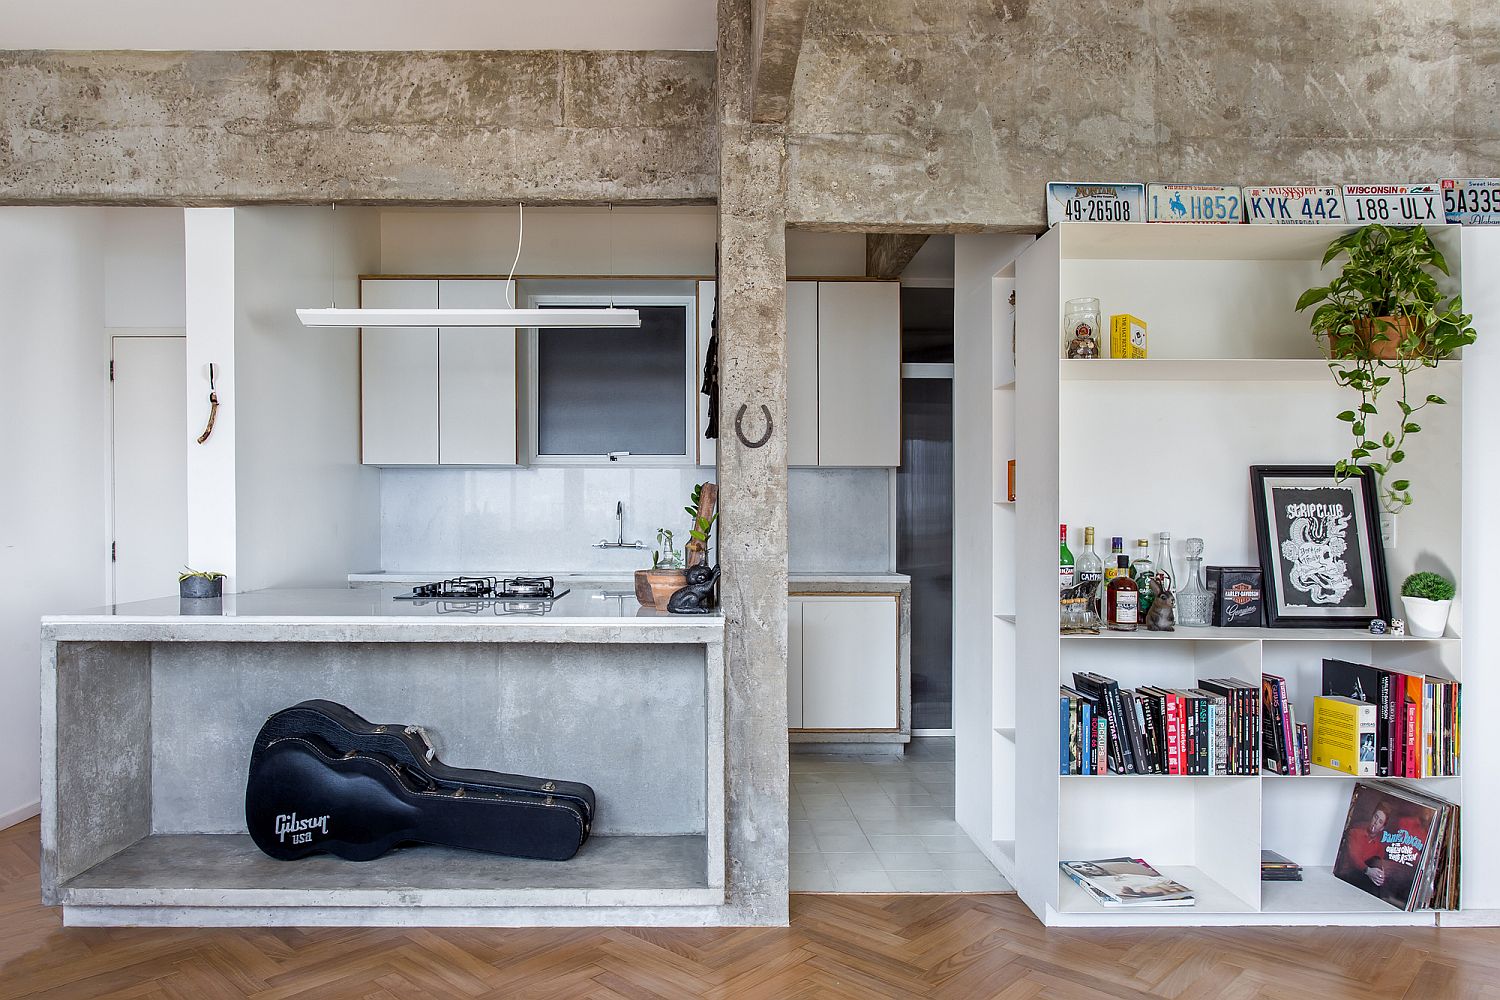 Concrete-and-wood-living-area-of-the-modern-Brazilian-apartment-with-white-shelves